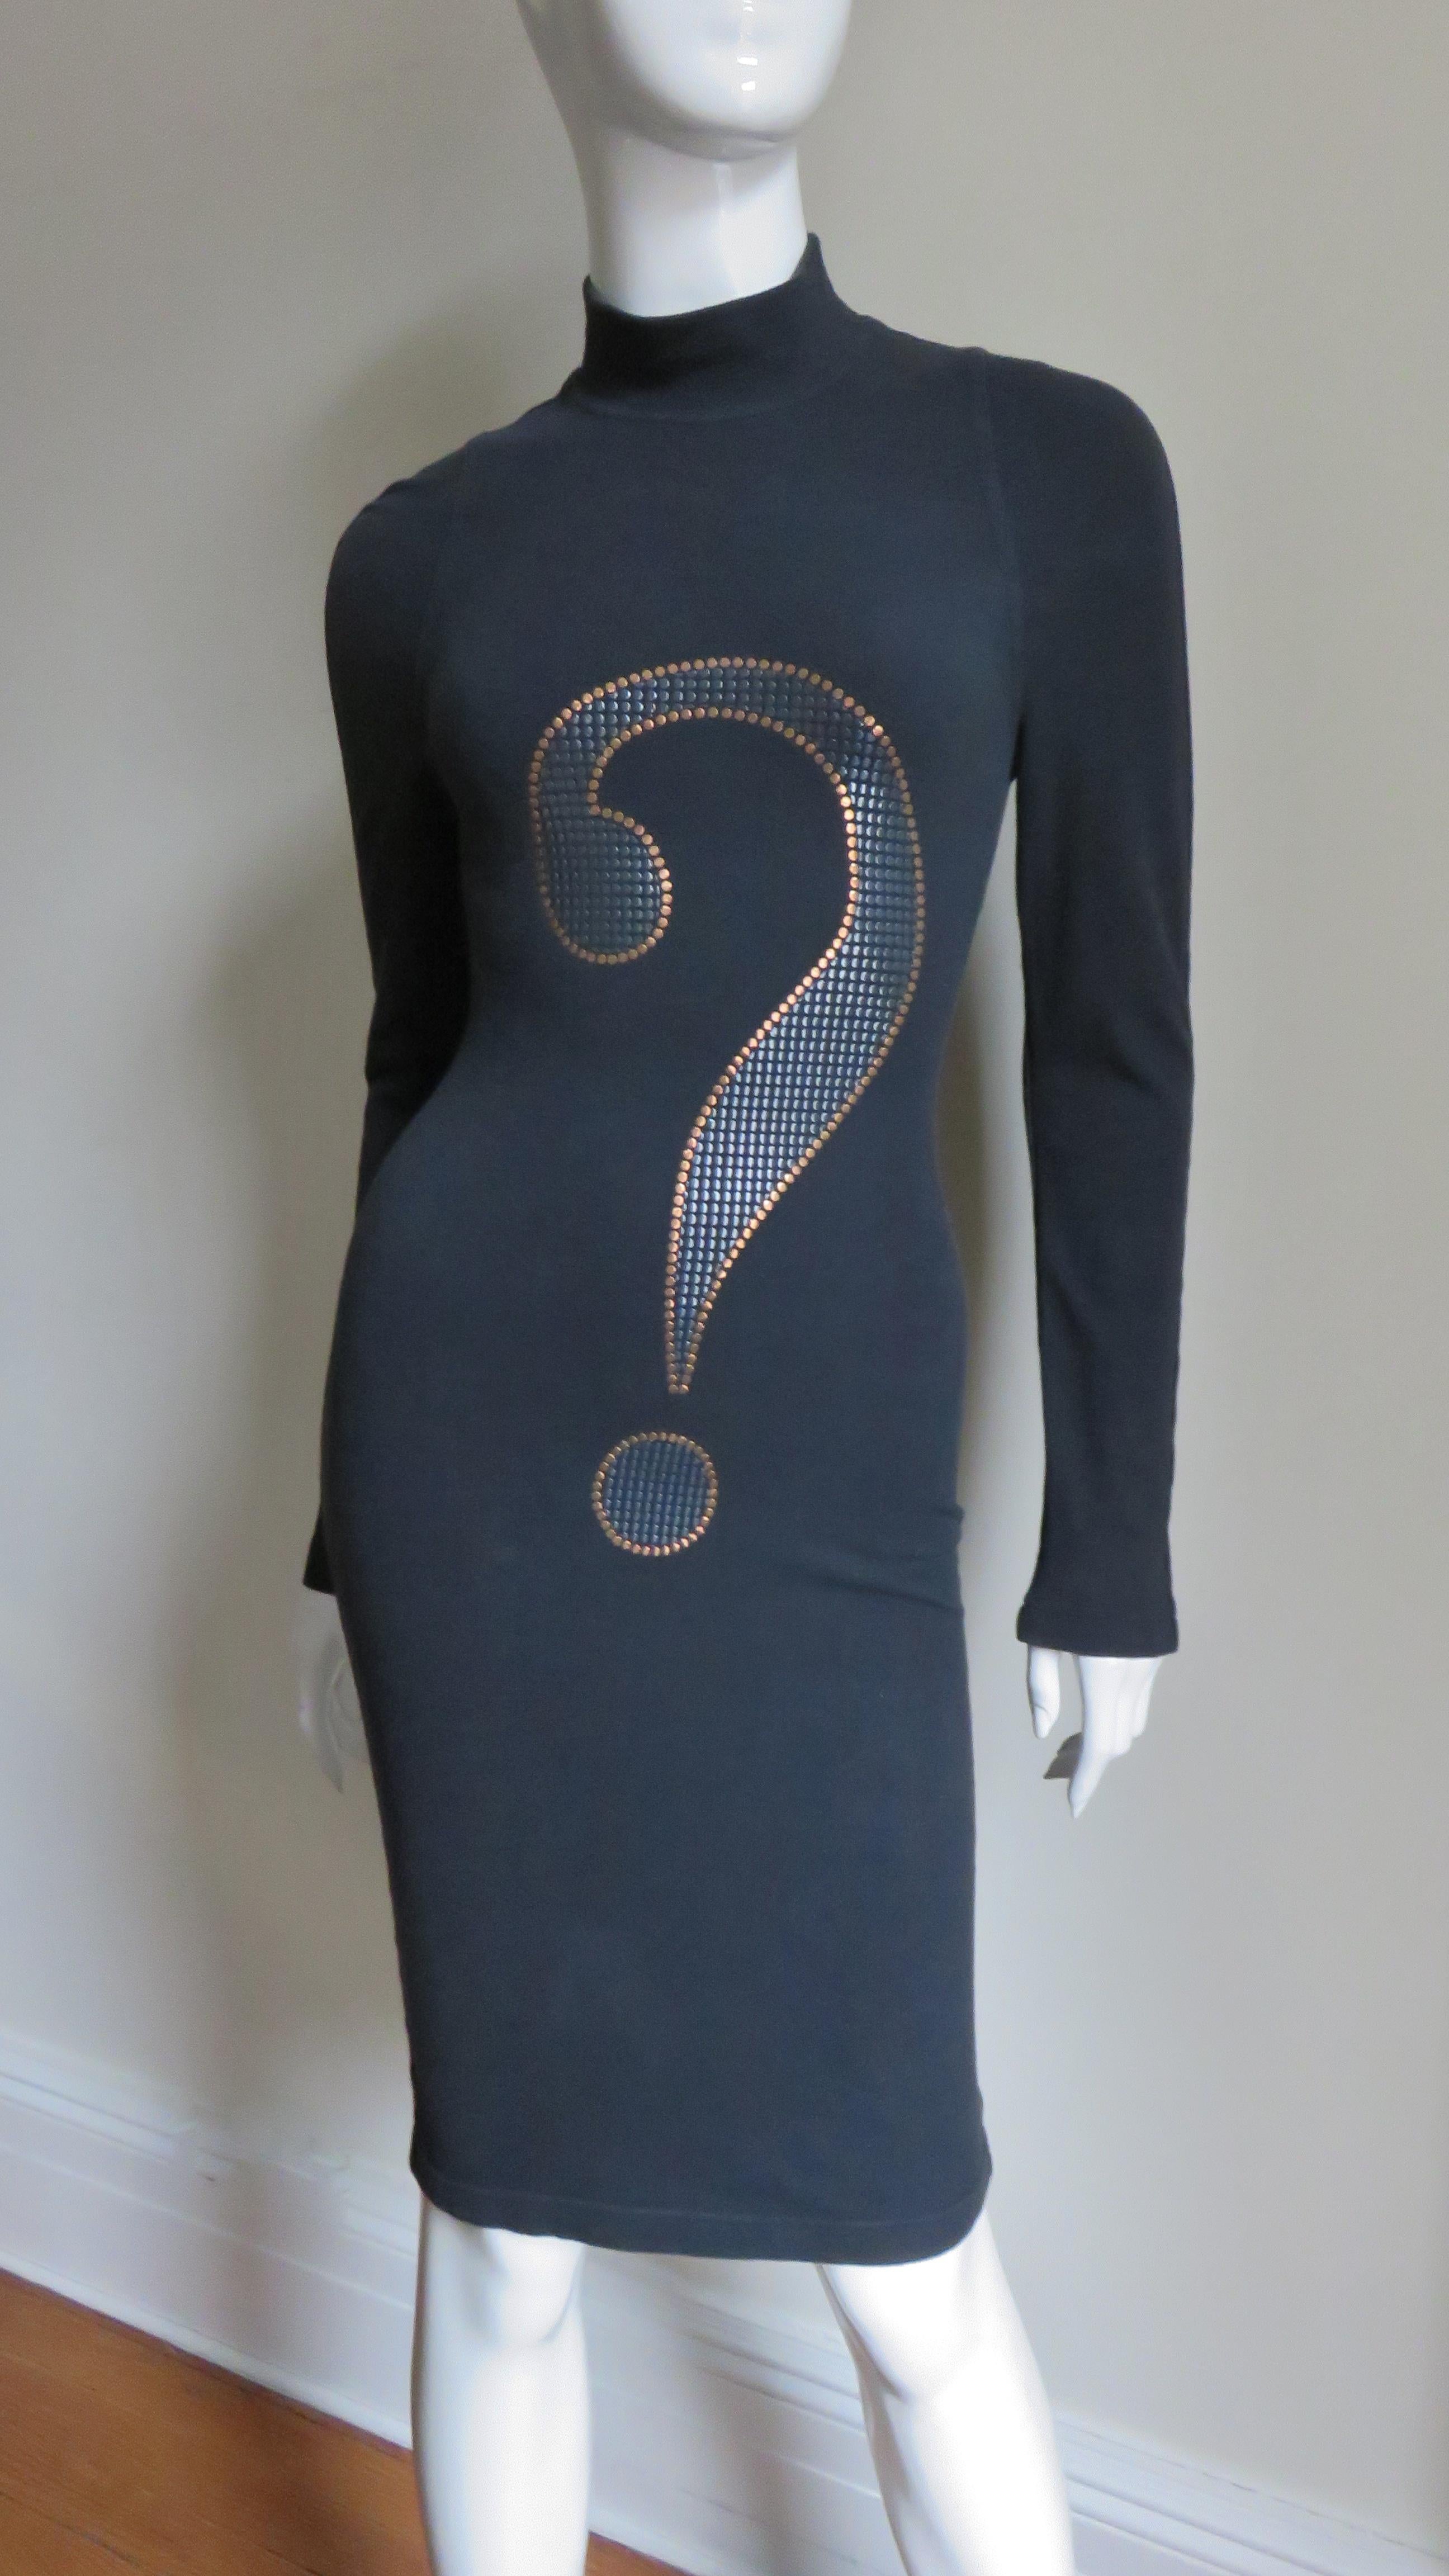 A black cotton jersey dress from Moschino.   It has a stand up collar, long sleeves and a large metallic applique question mark on the front.  It is unlined and slips on over the head.
Fits sizes Extra Small, Small, Medium.

Bust  33-36